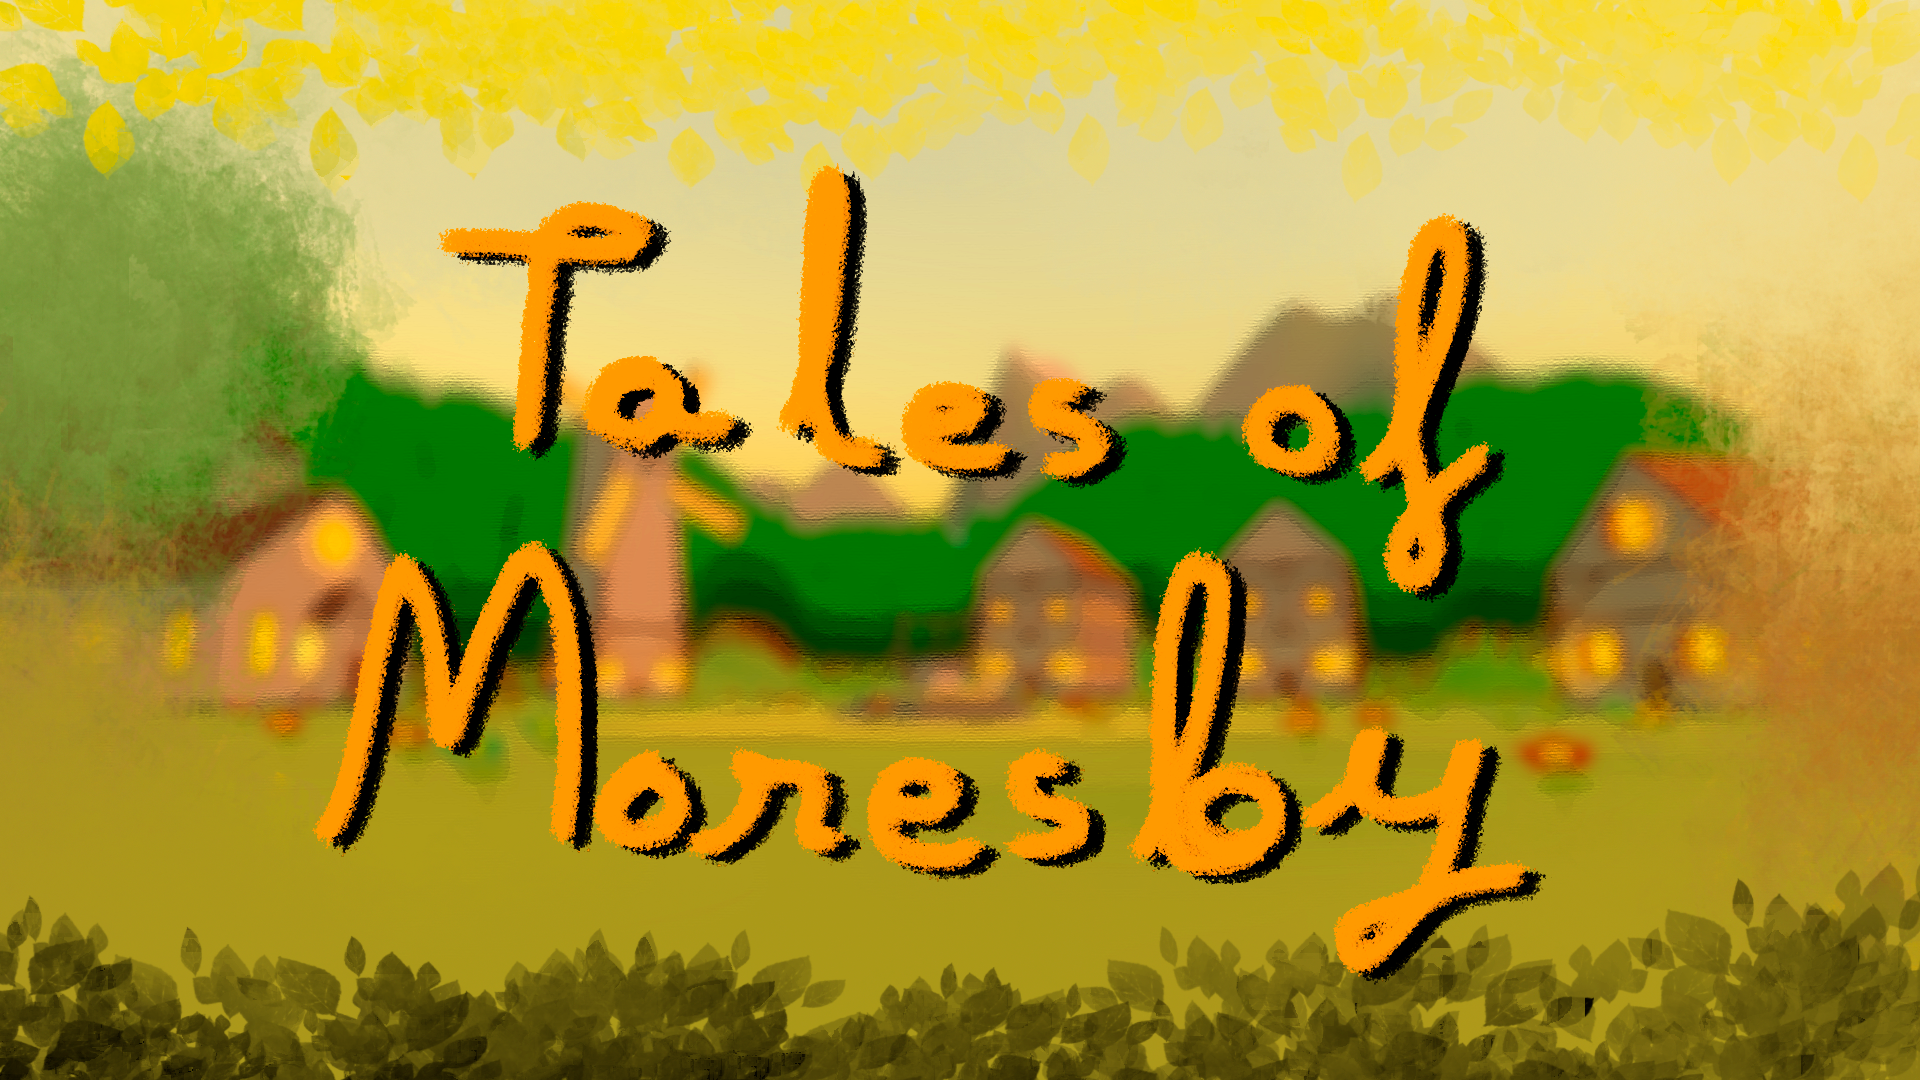 Tales of Moresby